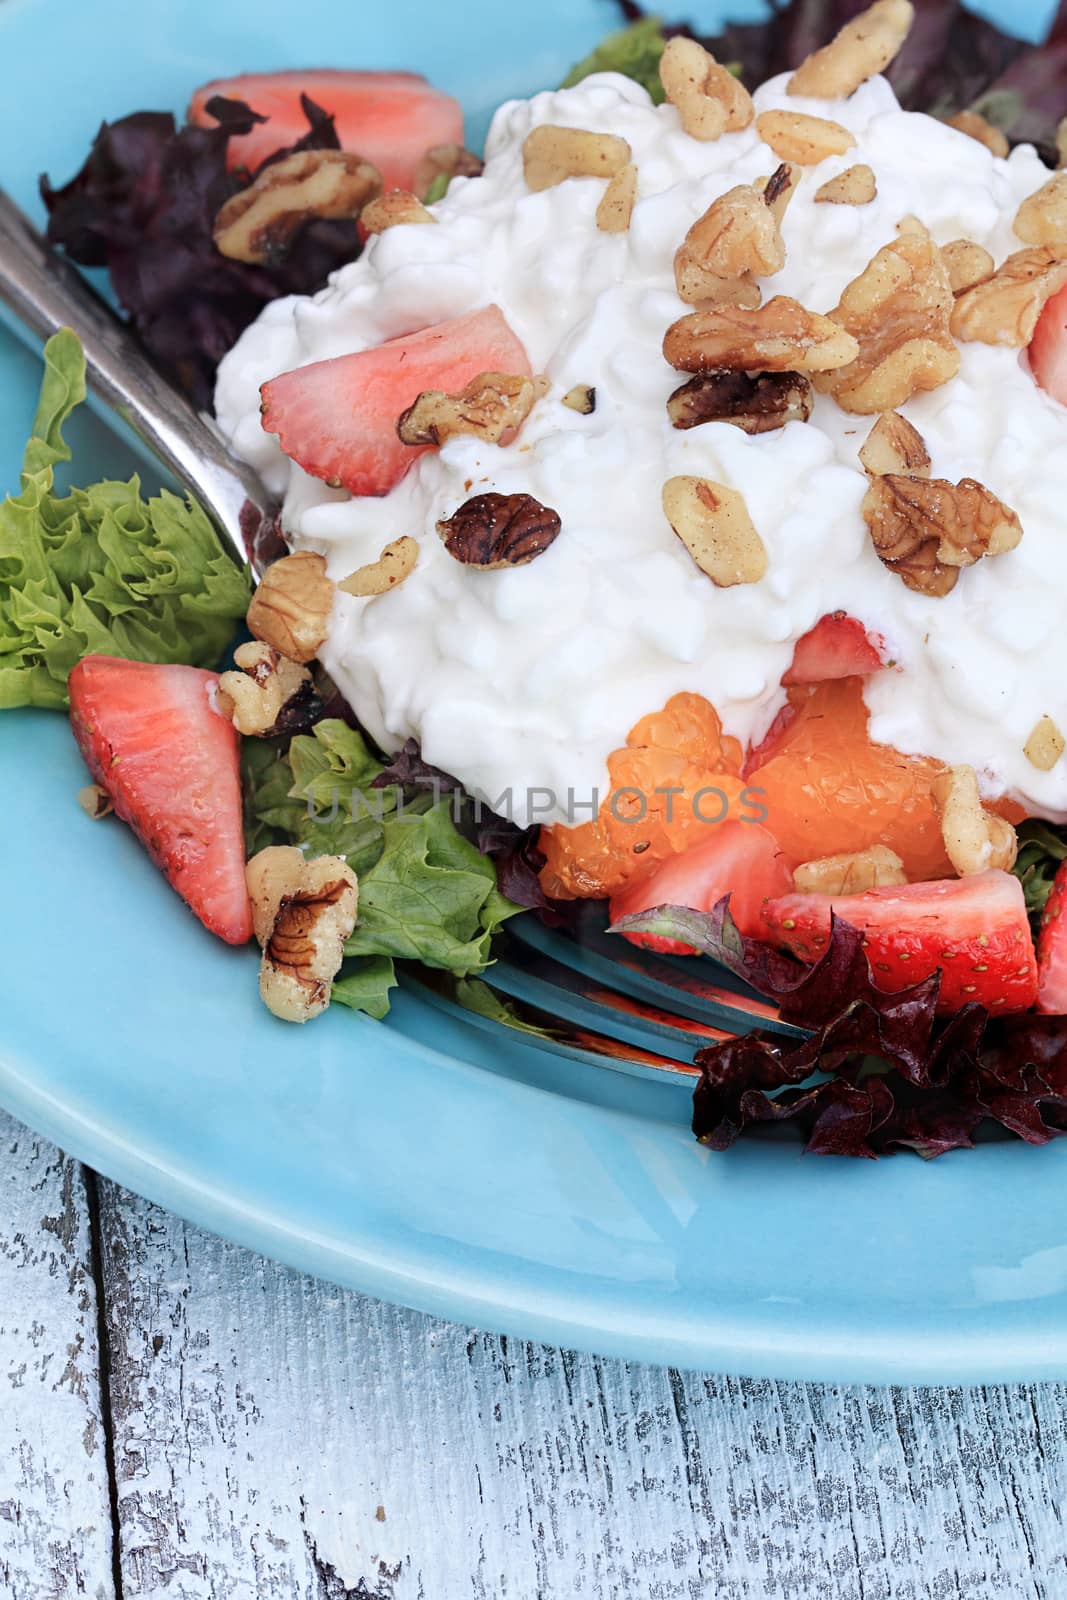 Strawberry and Cottage Cheese Salad by StephanieFrey